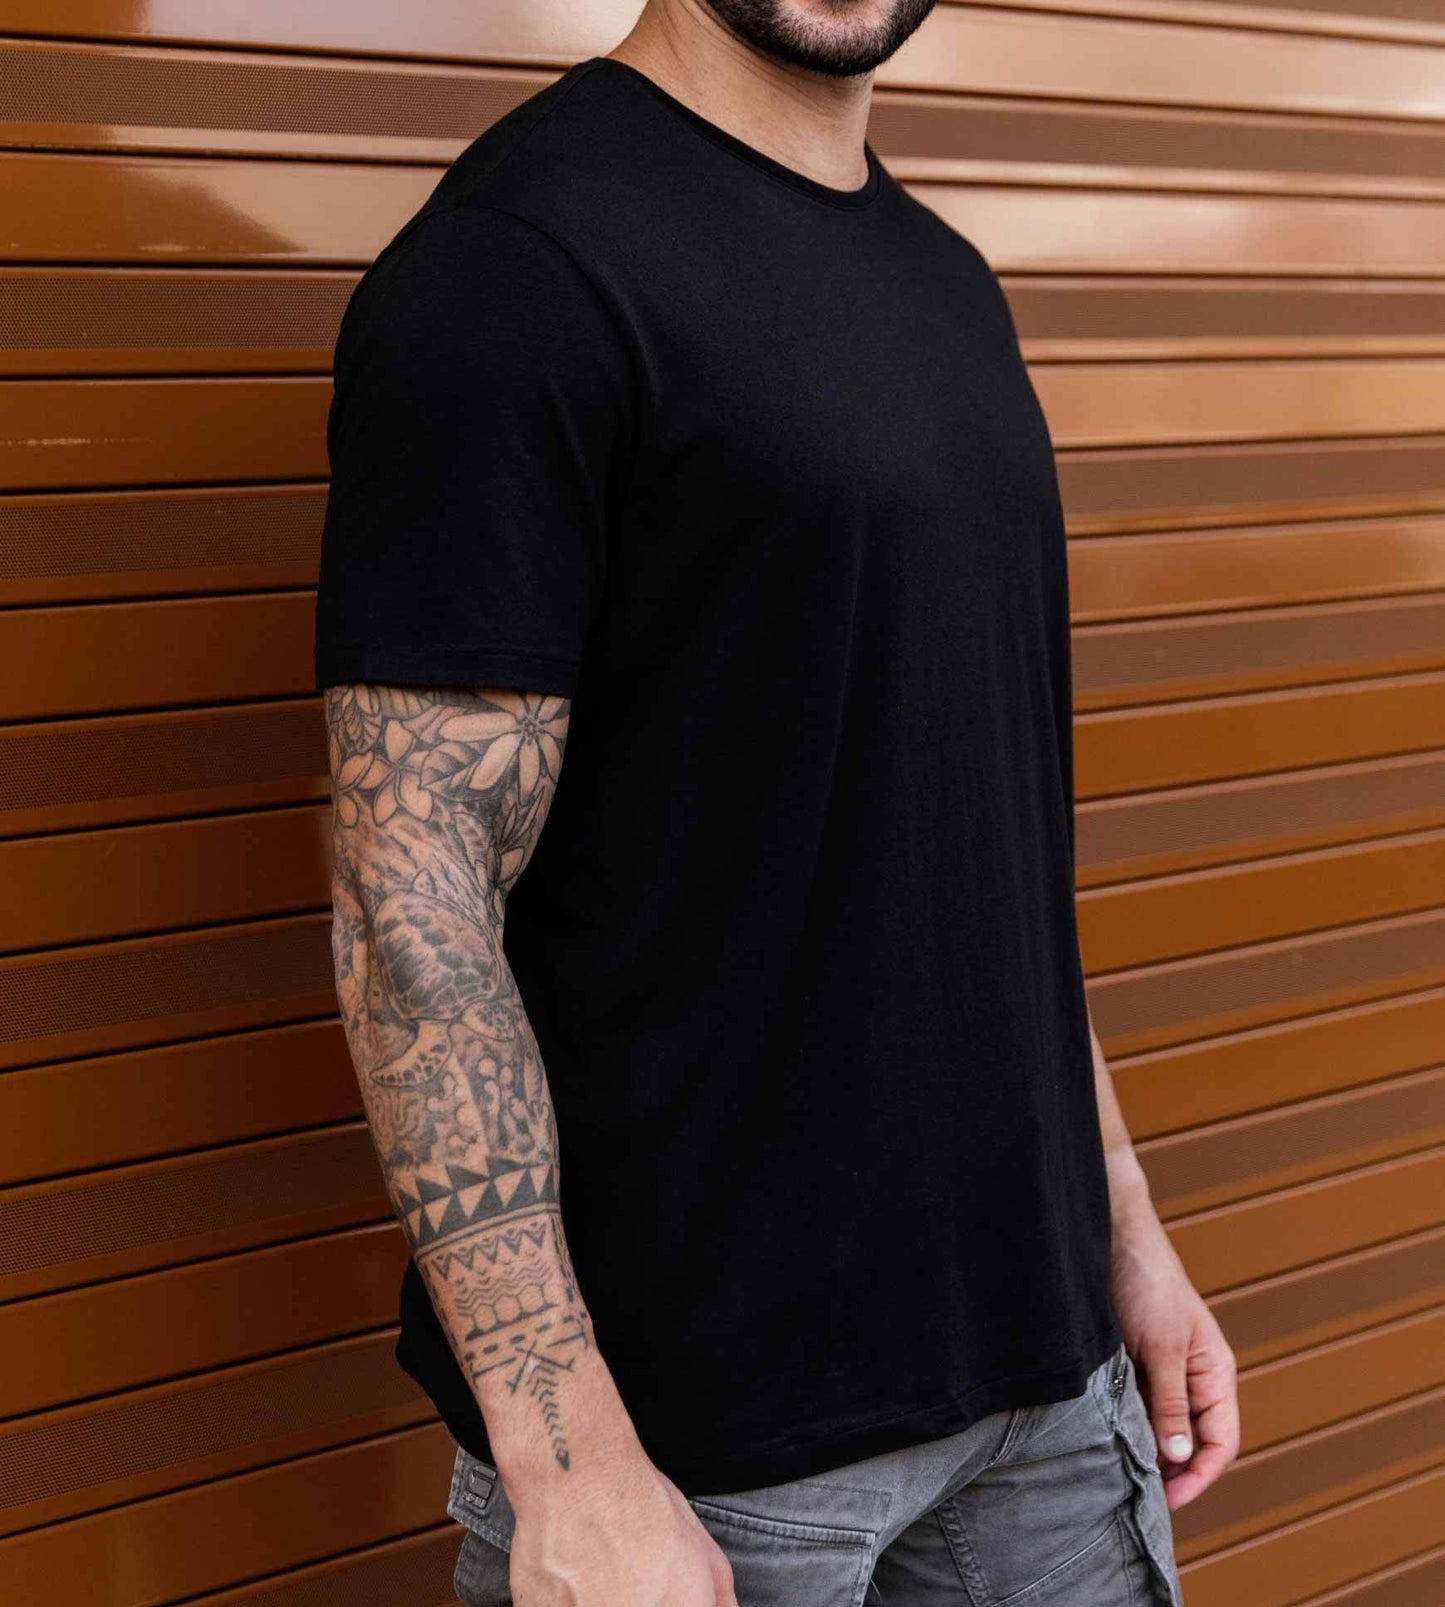 The Solid Black SuperSoft Classic Crew Neck Tee contains colors Maroon, Dim gray, Tan, Saddle brown, Saddle brown, Sienna, Rosy brown, Black, Saddle brown, Black